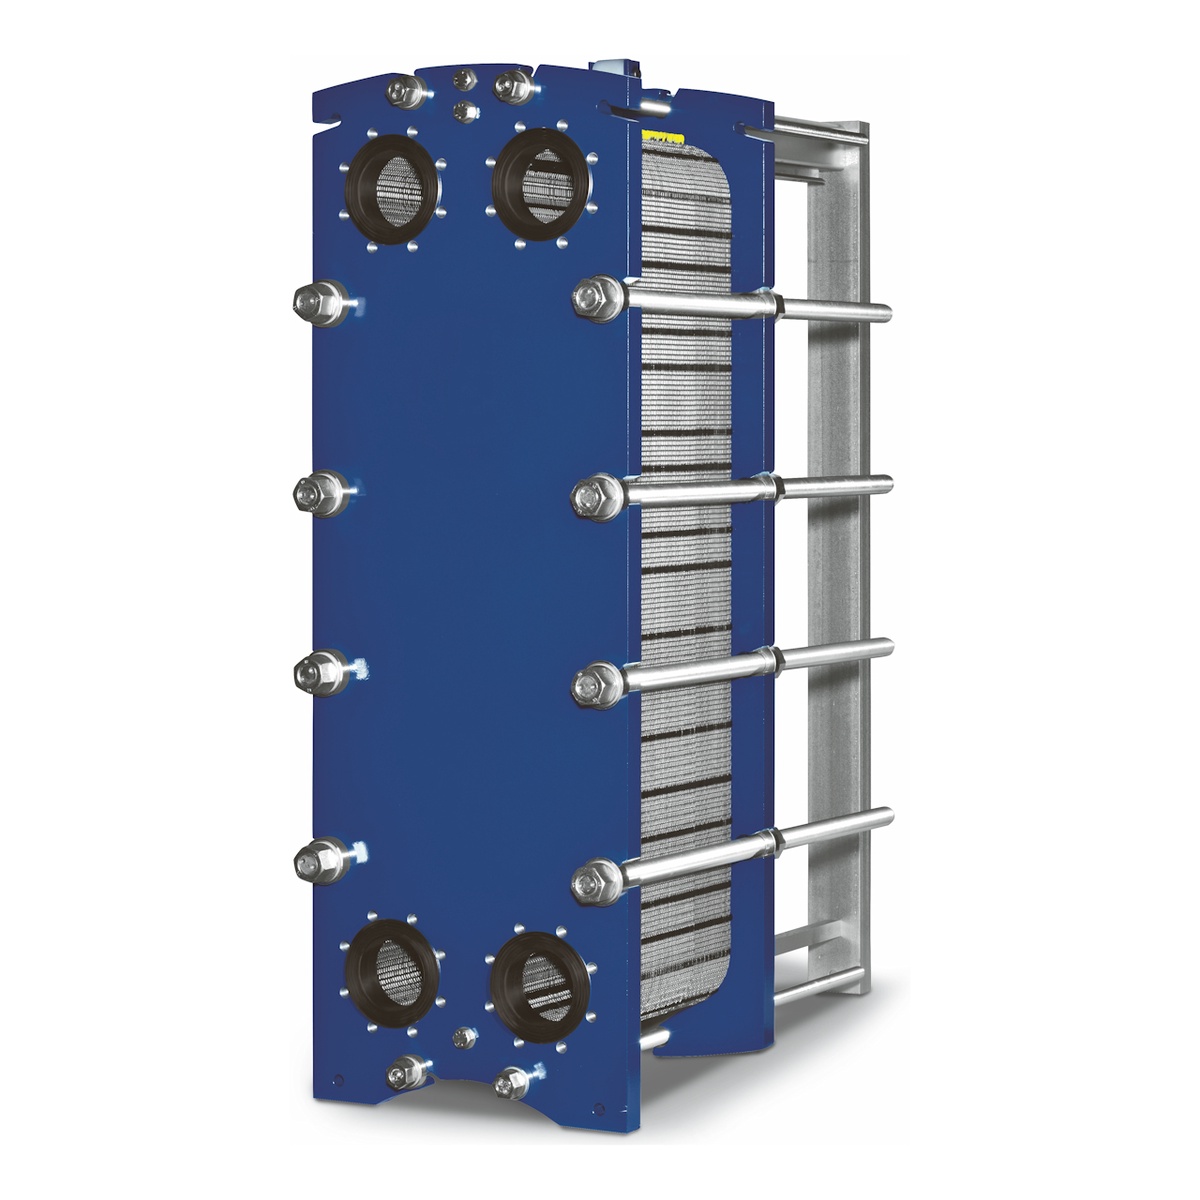 The Gasketed Plate Heat Exchanger: A Tool For Hygienic Applications